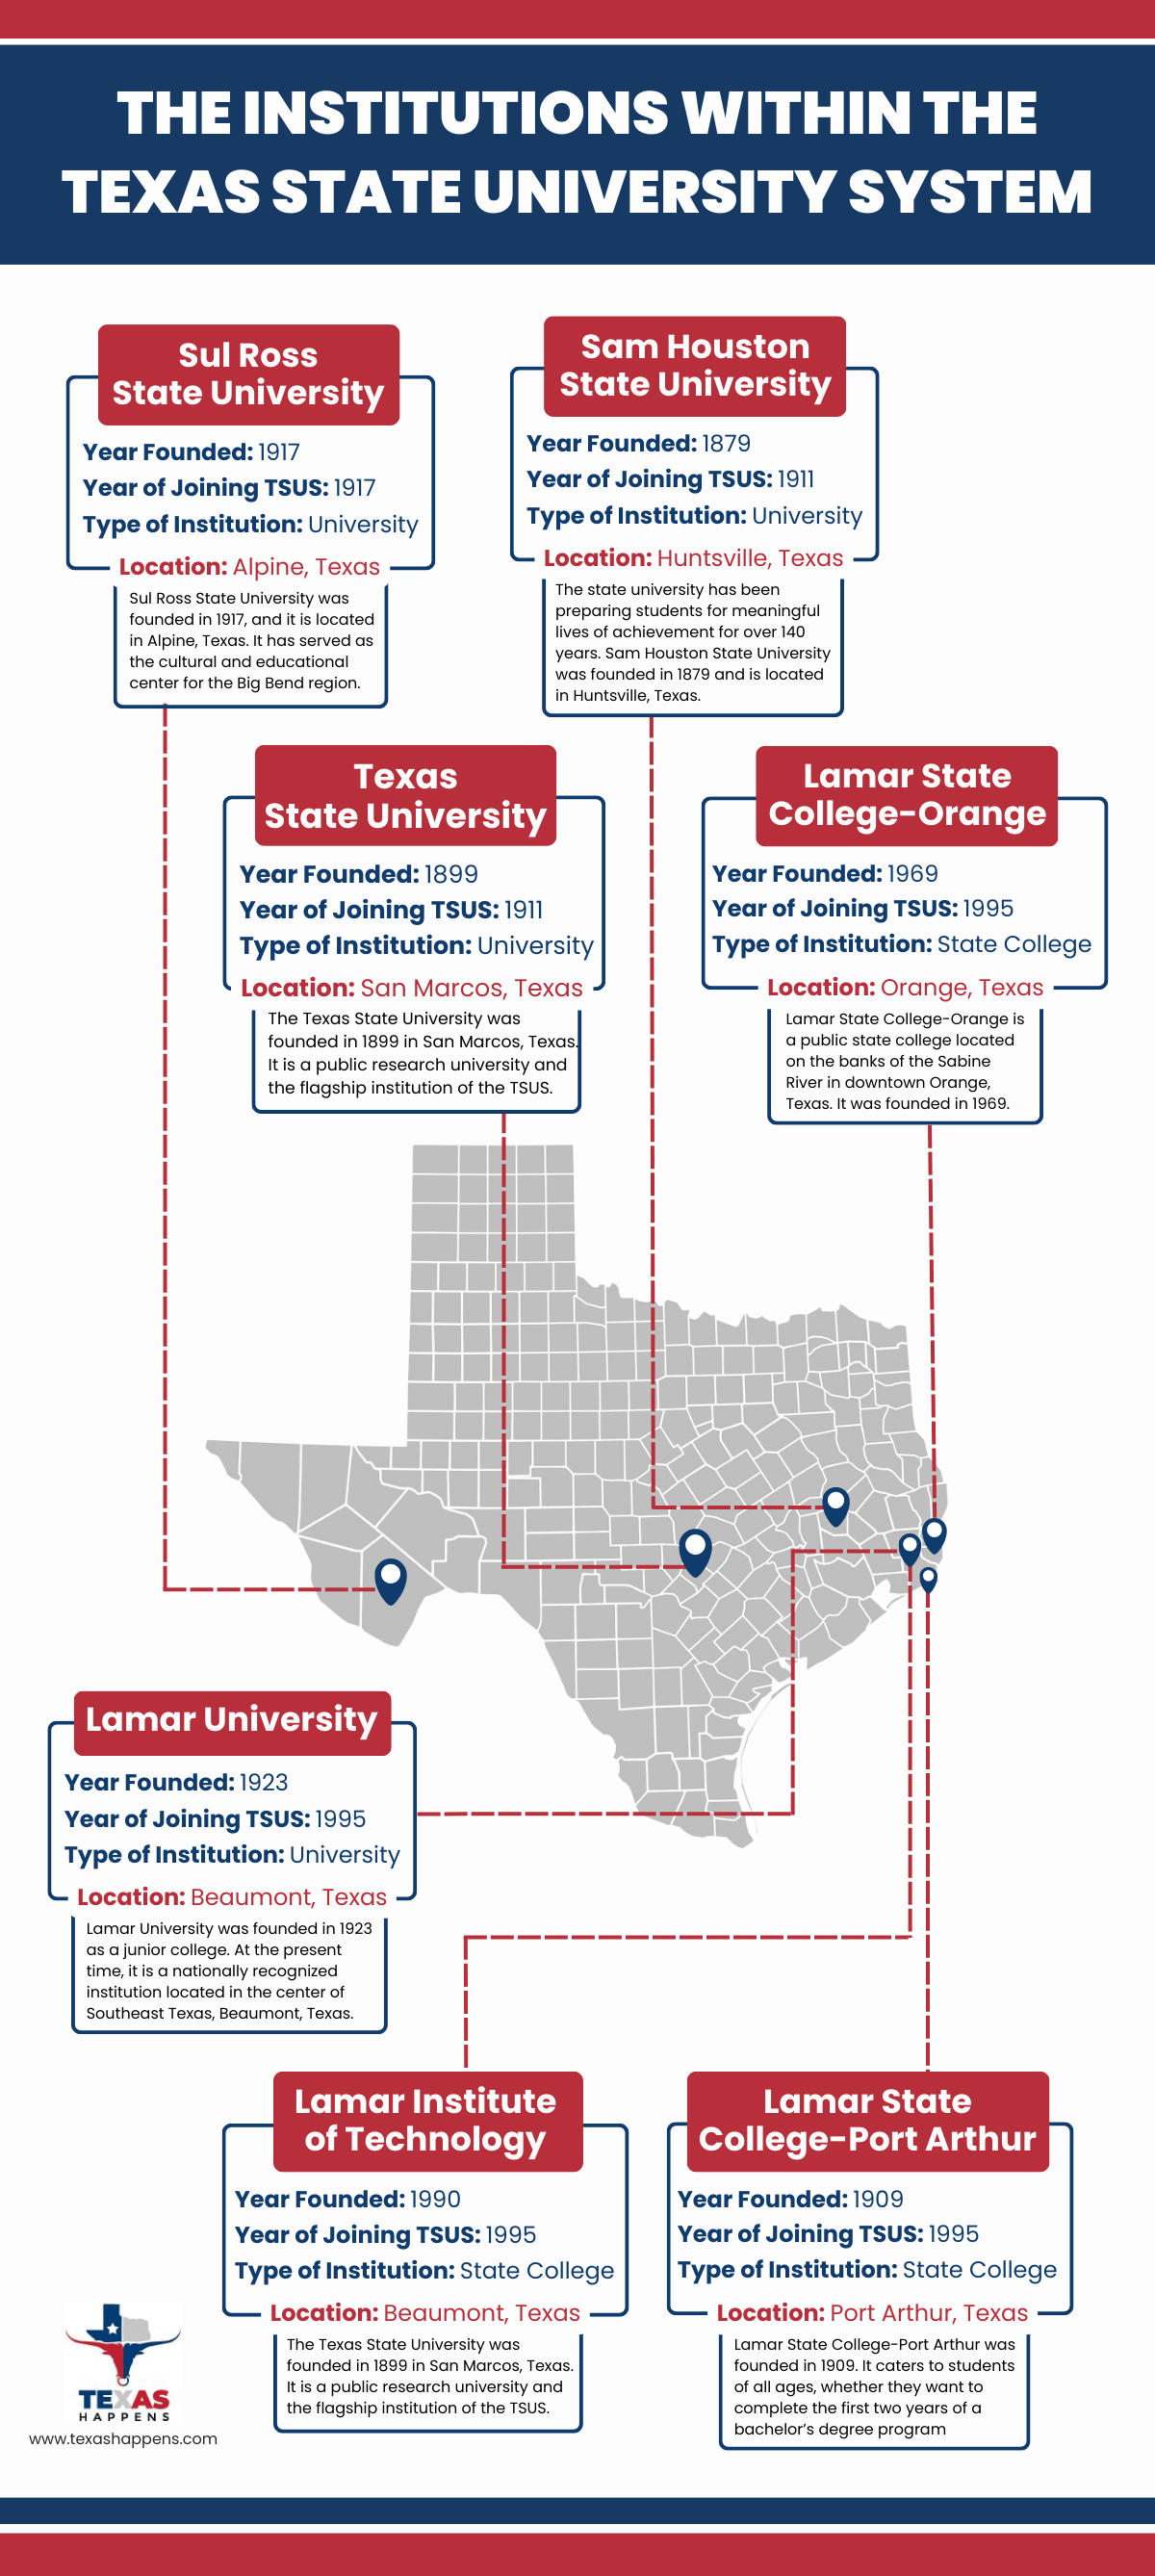 The Institutions within the Texas State University System